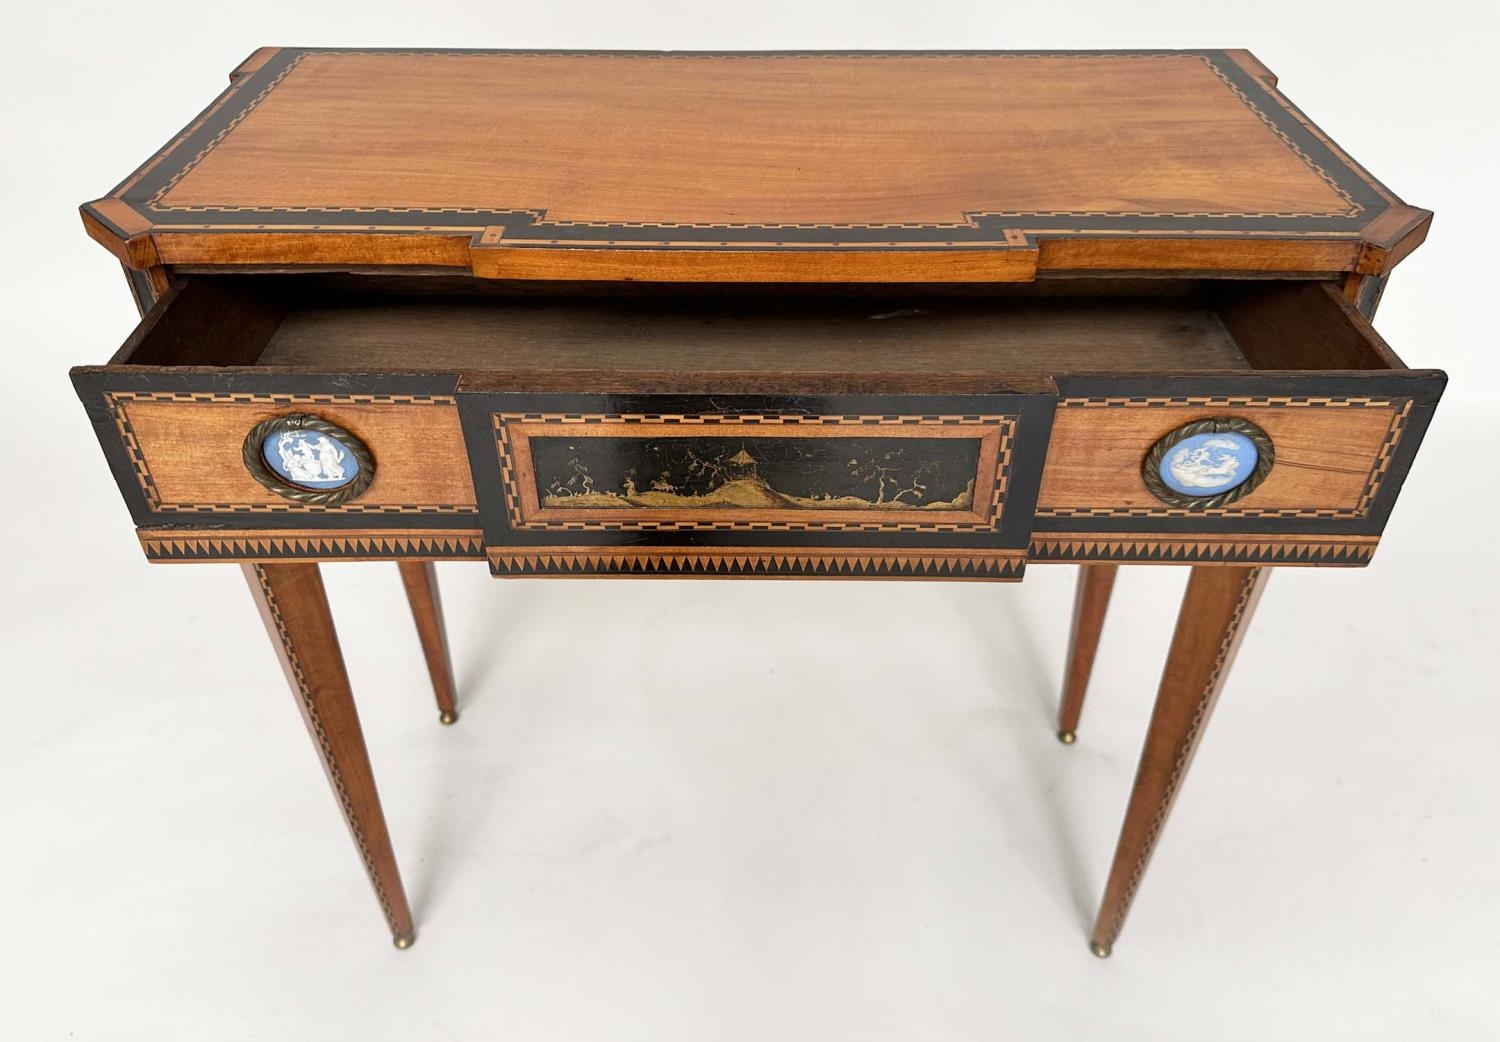 DUTCH HALL TABLE, early 19th century satinwood and ebony of breakfront form with full width frieze - Image 5 of 8